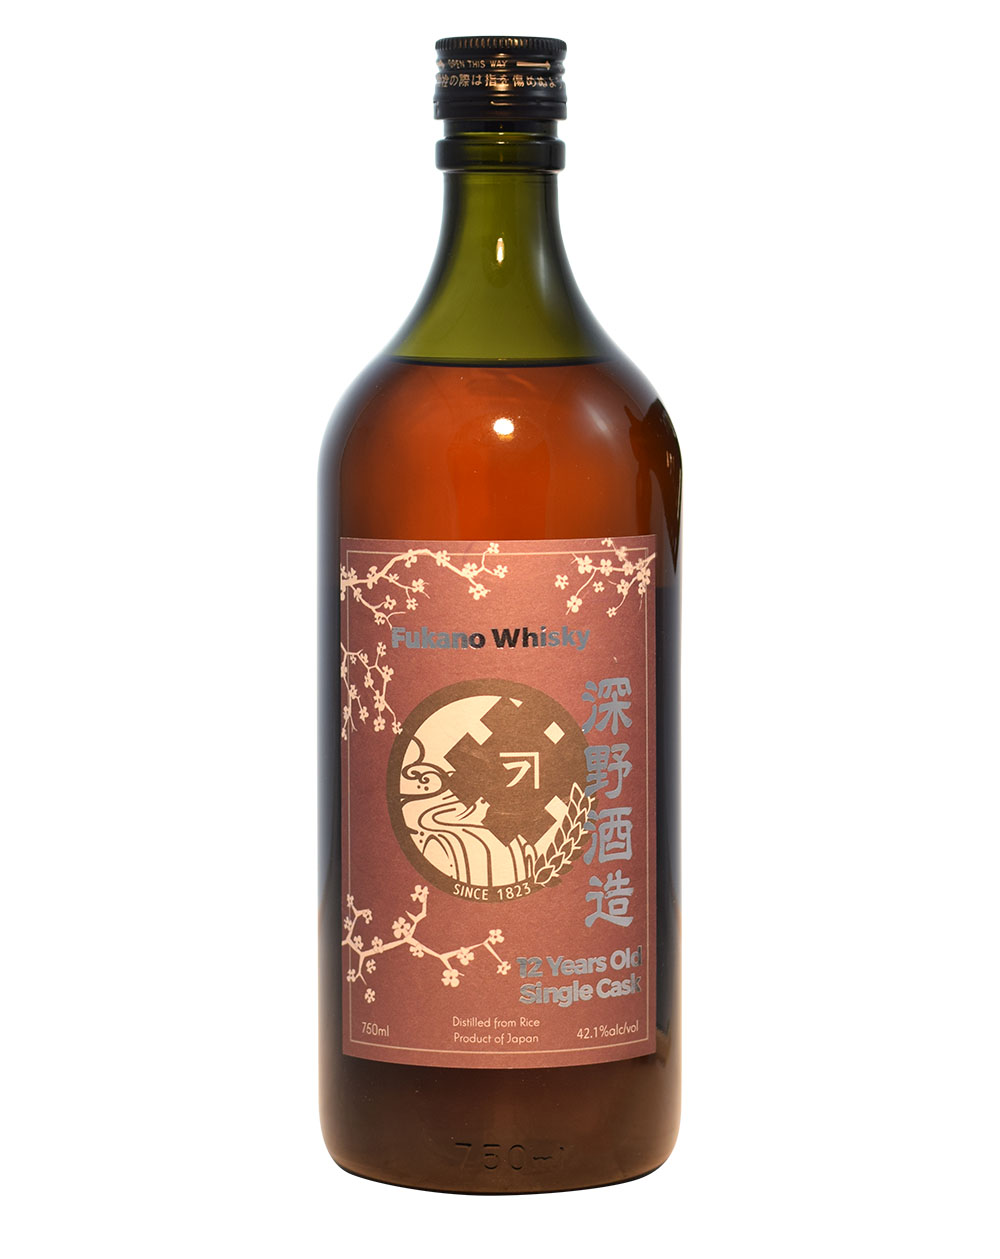 Fukano Single Cask (12 Years Old) Musthave Malts HMH